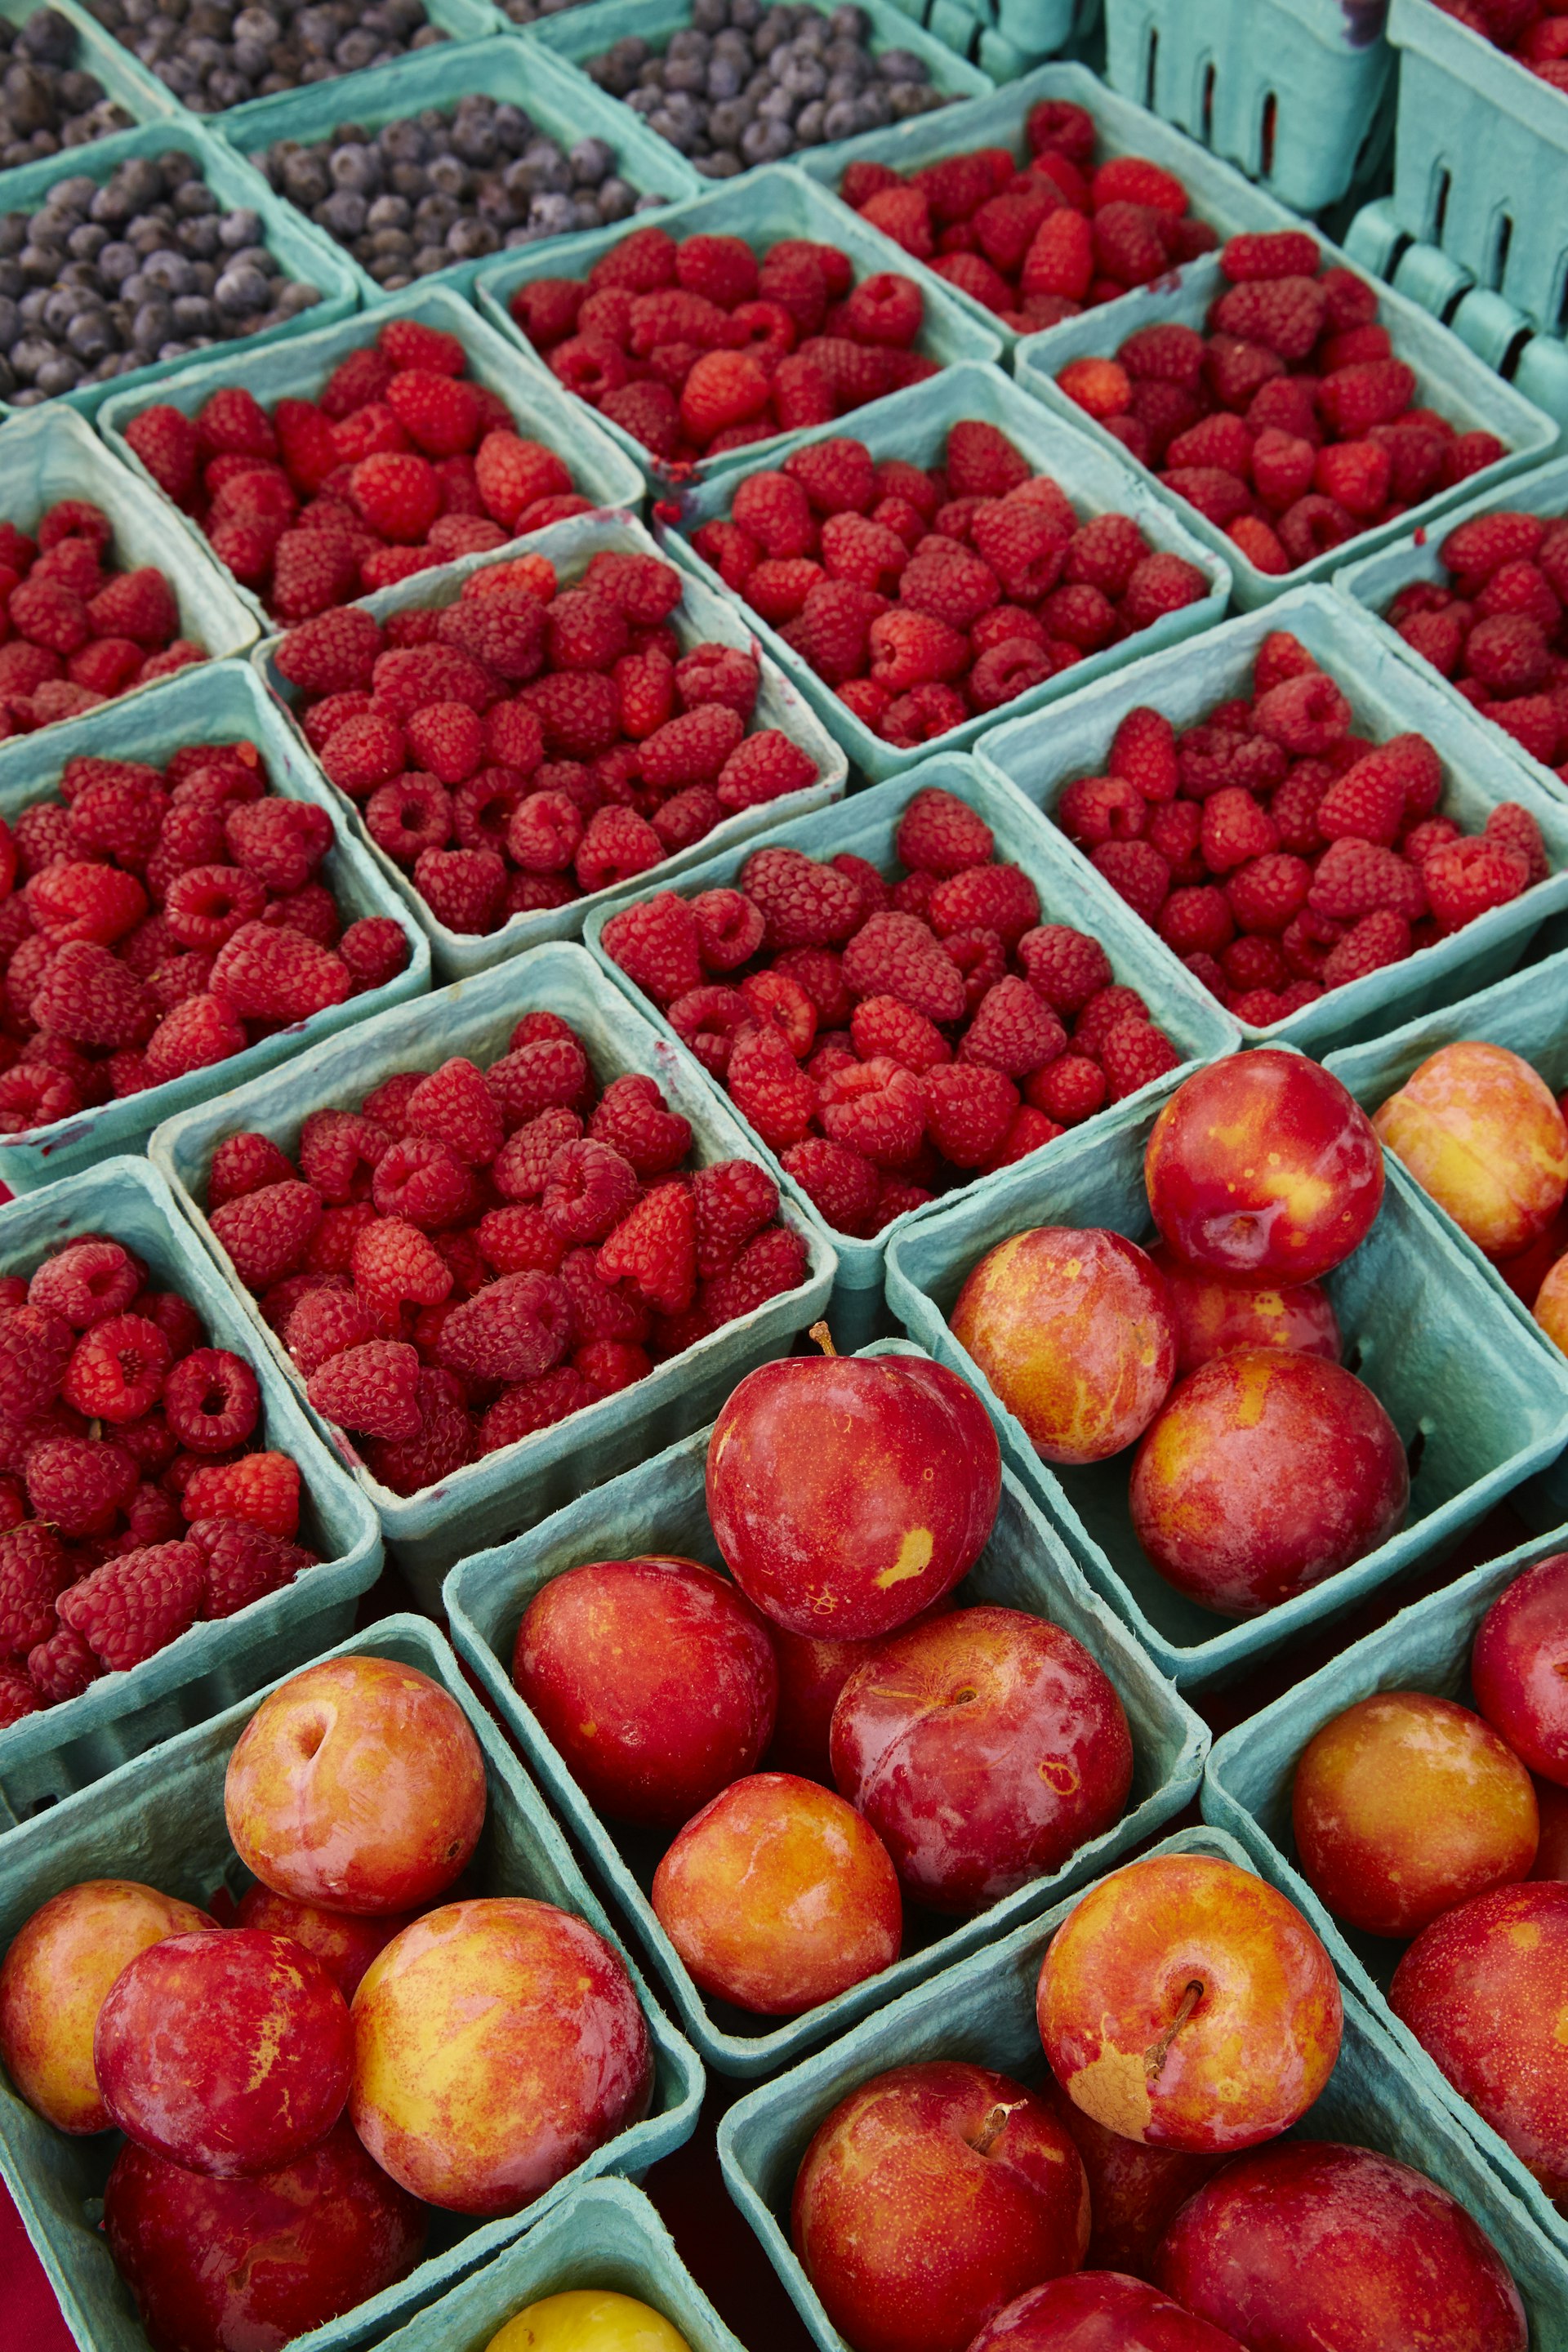 Raspberries, plums and blueberries at fresh produce stand in the Catskills